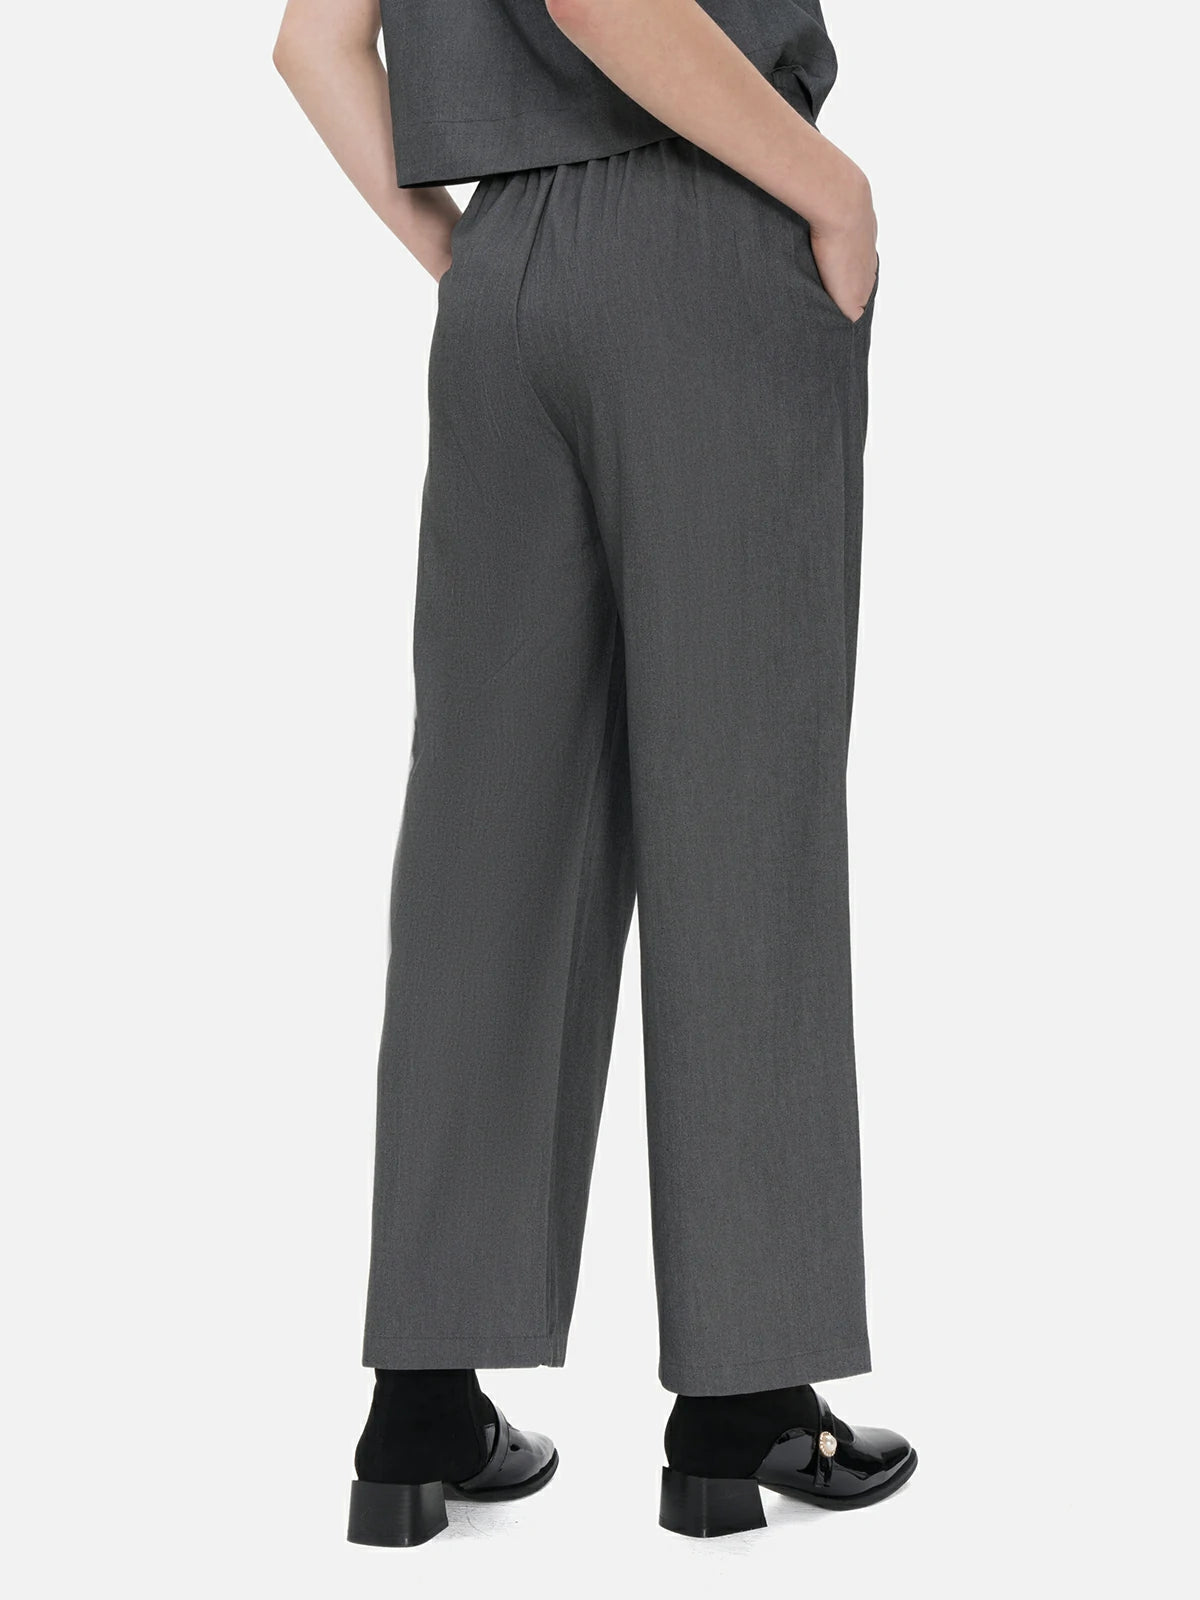 Lightweight and stylish gray bottoms with a flowing silhouette for a modern look